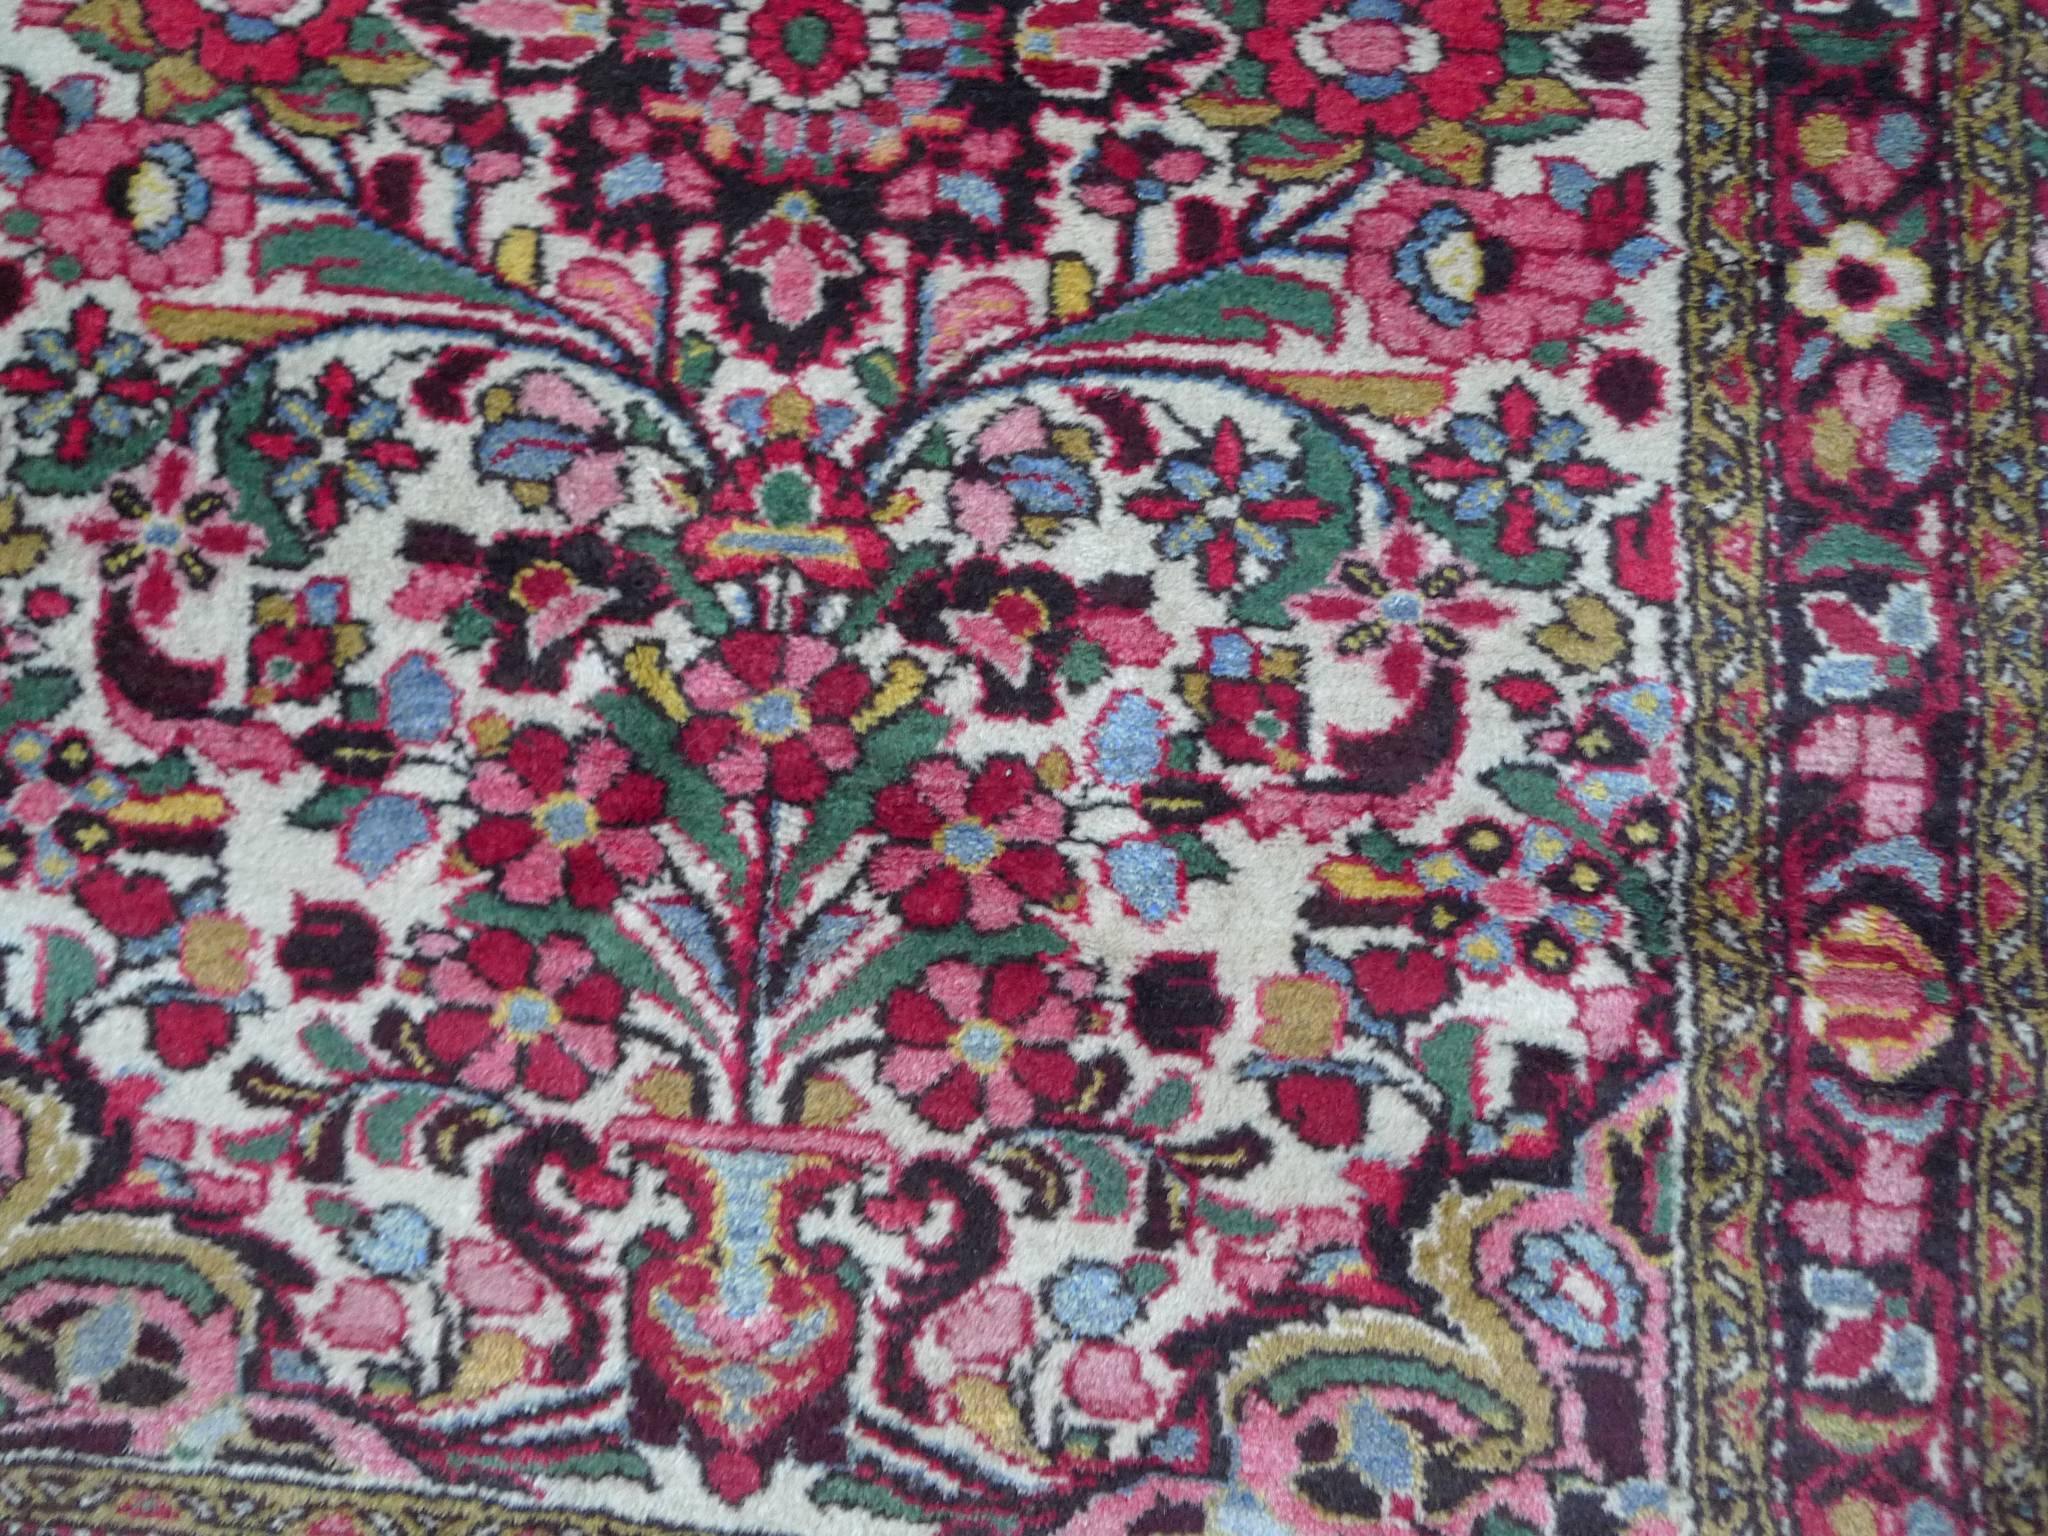 This Persian rug is small and woven with thick wool. Its design consists of central floral motifs in a white field. A dense palette of green, pink, brown, black, and white hues is repeated throughout and in the border pattern.